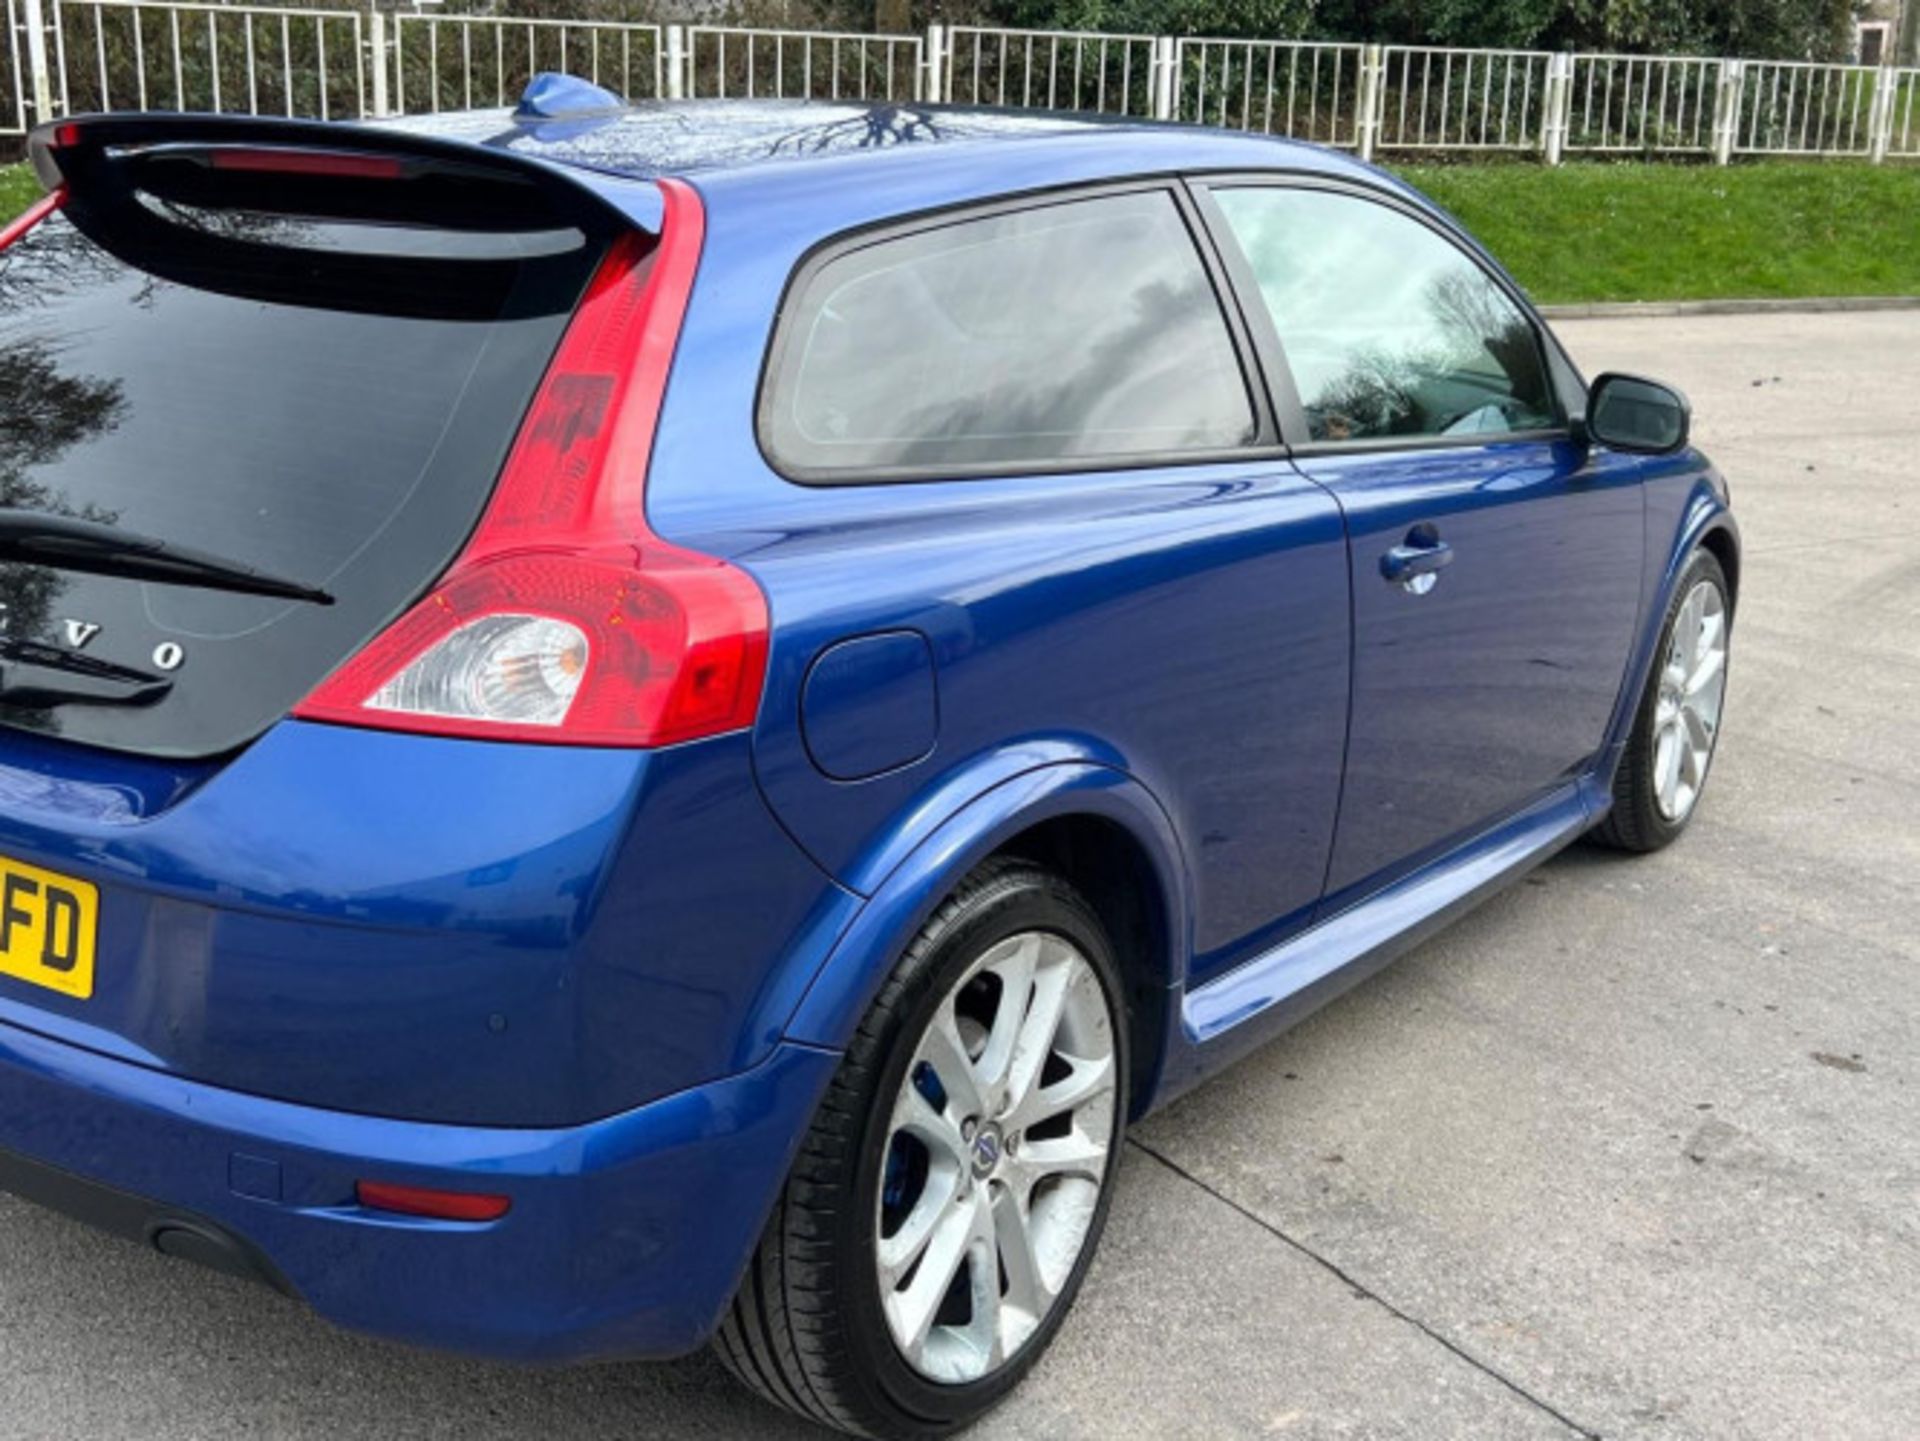 VOLVO C30 2.0D R-DESIGN SPORT 2DR - SPORTY AND LUXURIOUS COMPACT CAR >>--NO VAT ON HAMMER--<< - Image 59 of 71